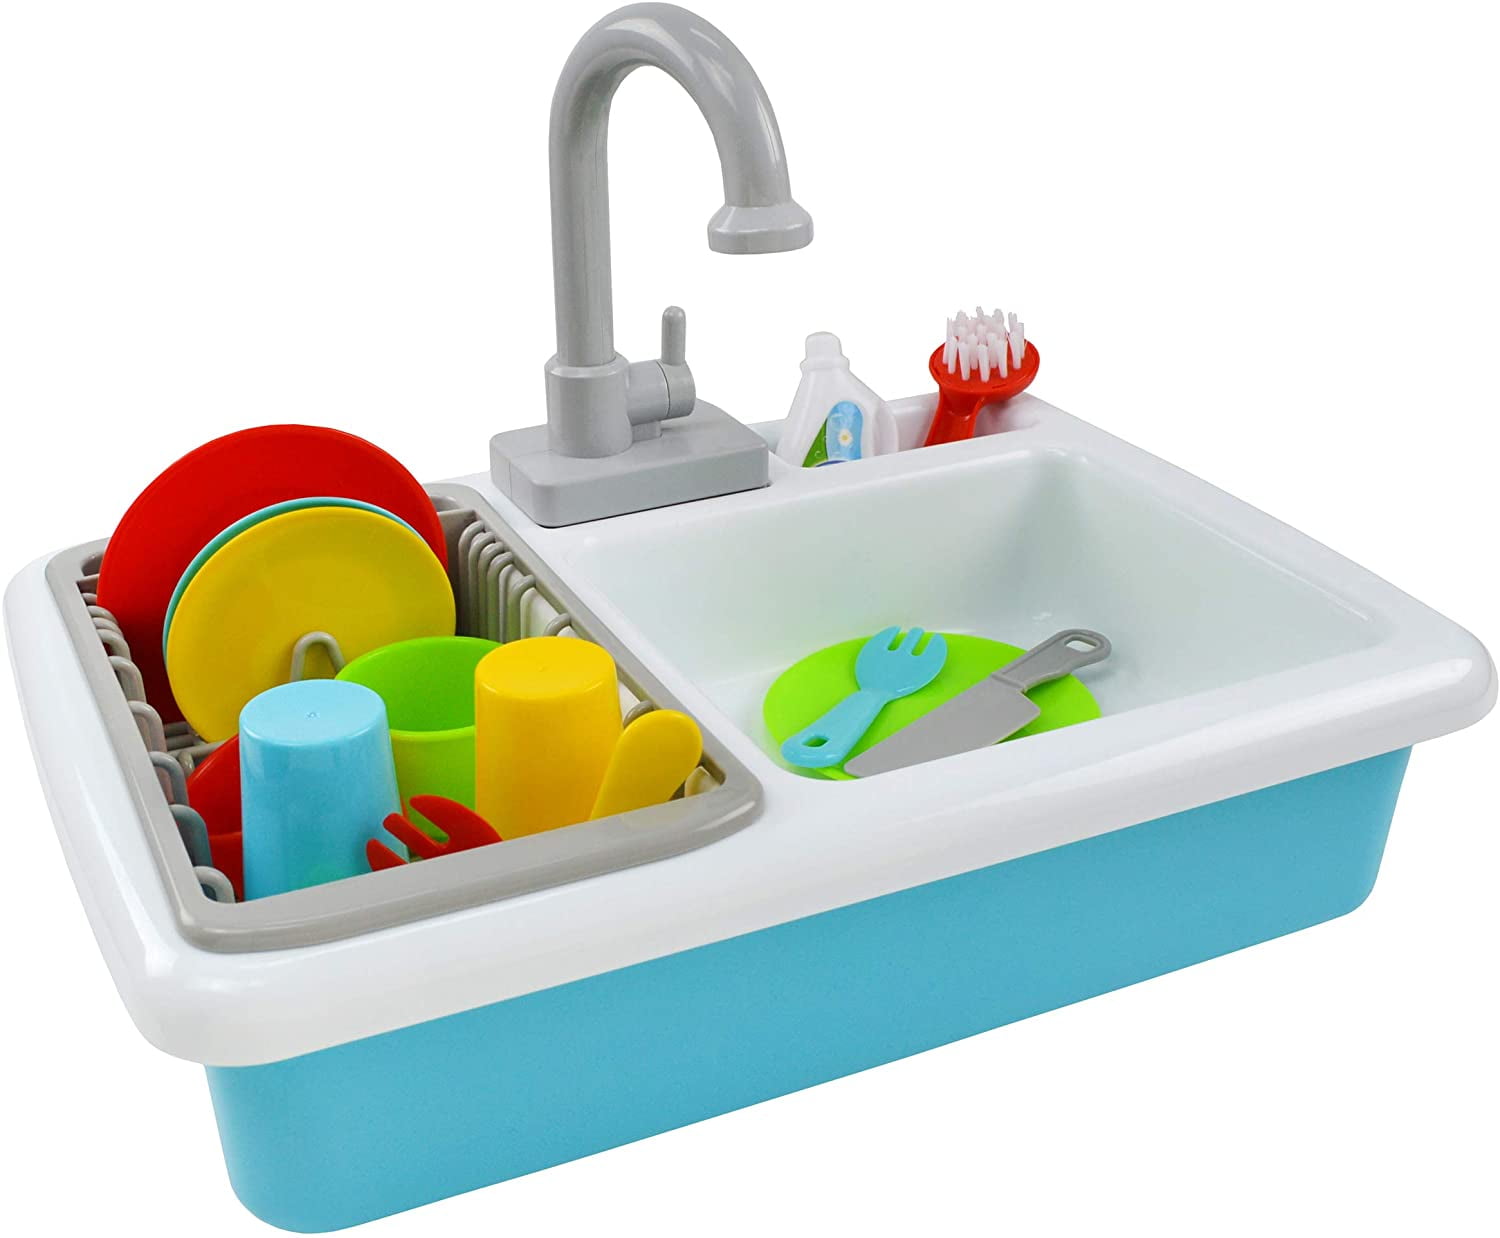 Jimmy's Toys Kids Play Pretend Dish Washing Sink Basin with Real